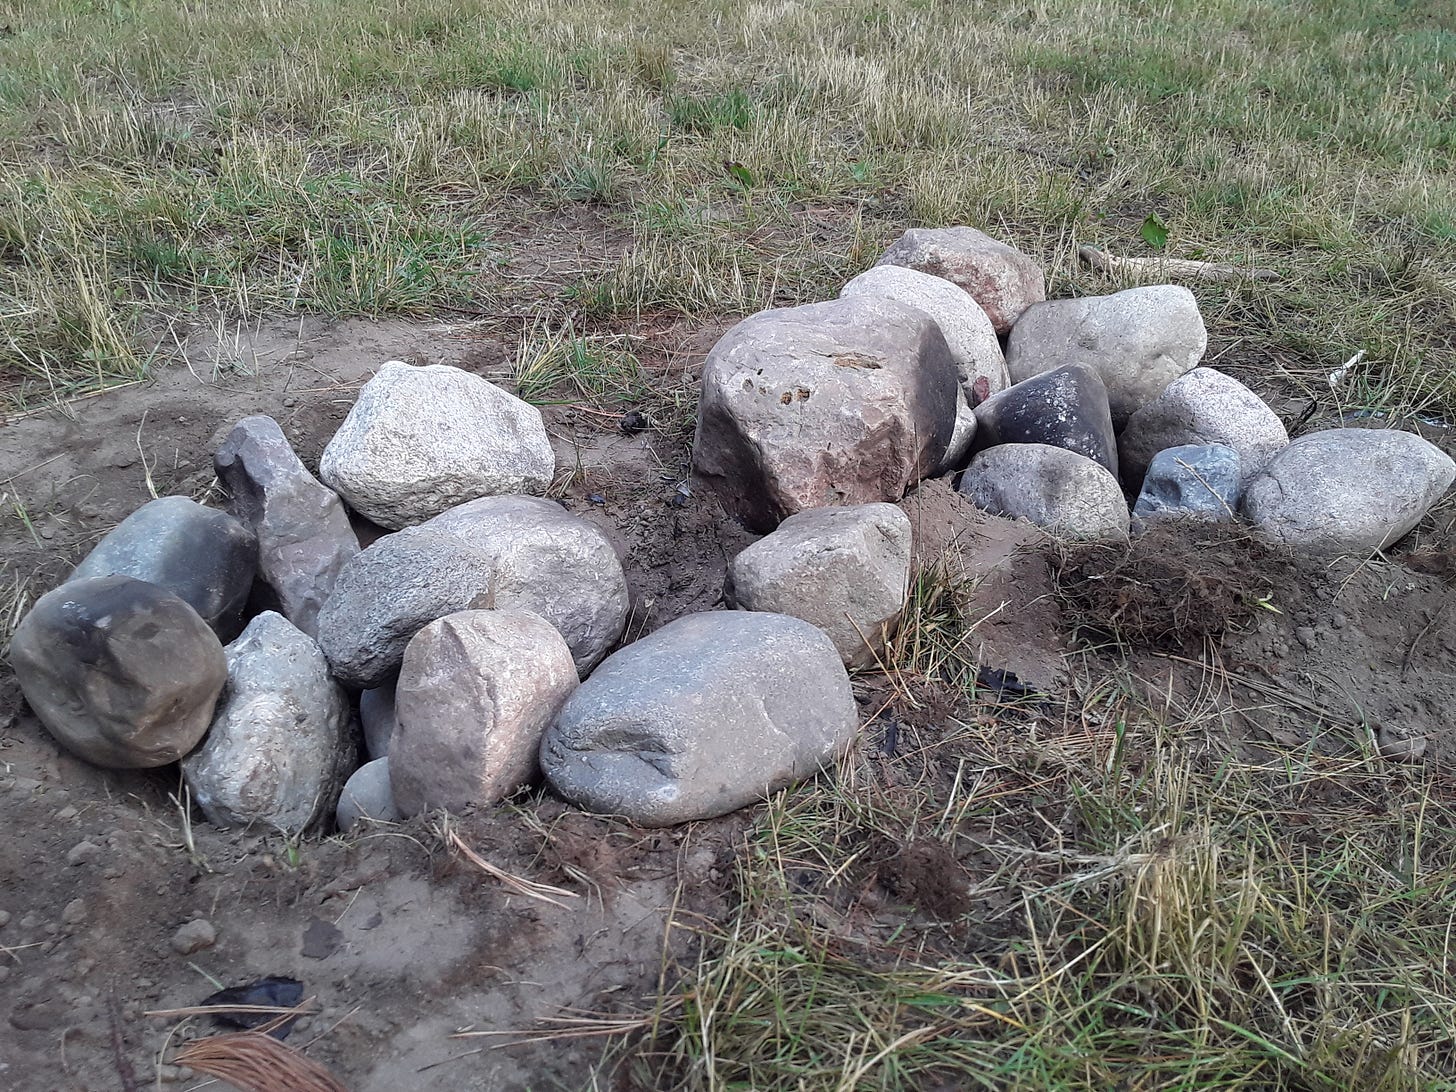 Photograph of two, small, adjacent fire pits dug in to the grass at Davis Street Park, using large rocks that were removed from the skateboard plaza.  Four of the rocks are partially scorched black from fire.